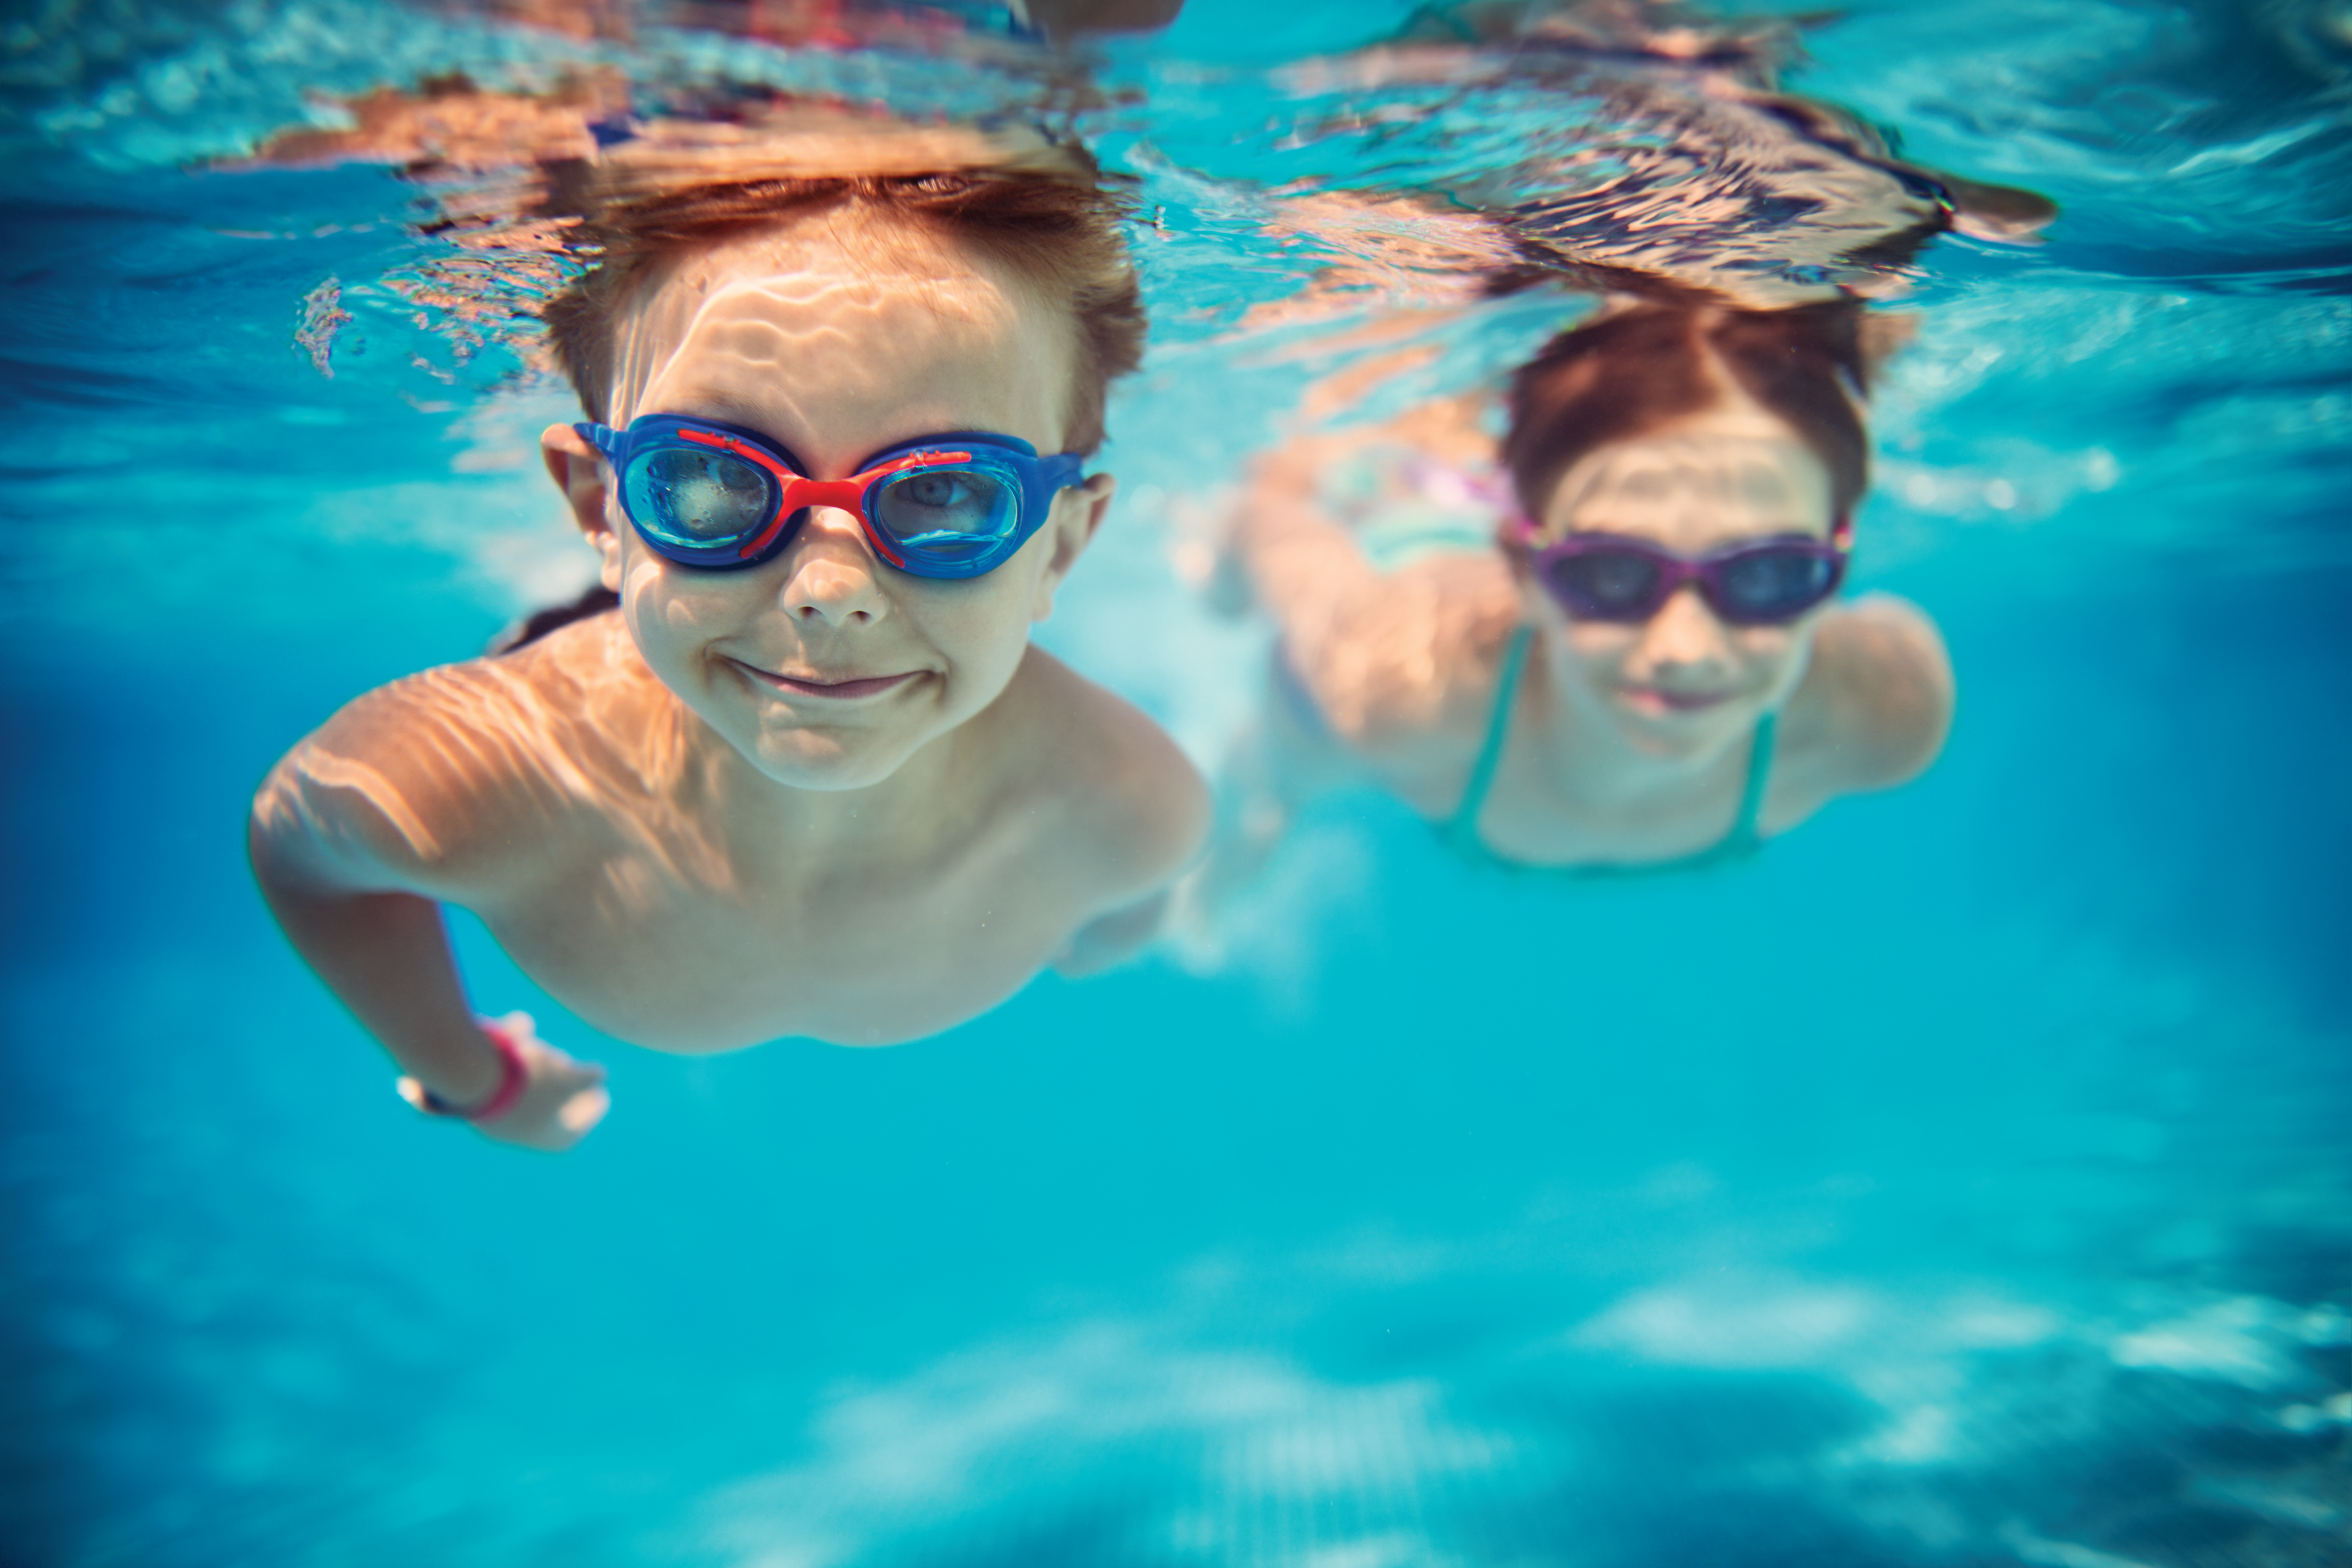 Two children swim under blue water towards the camera smiling.